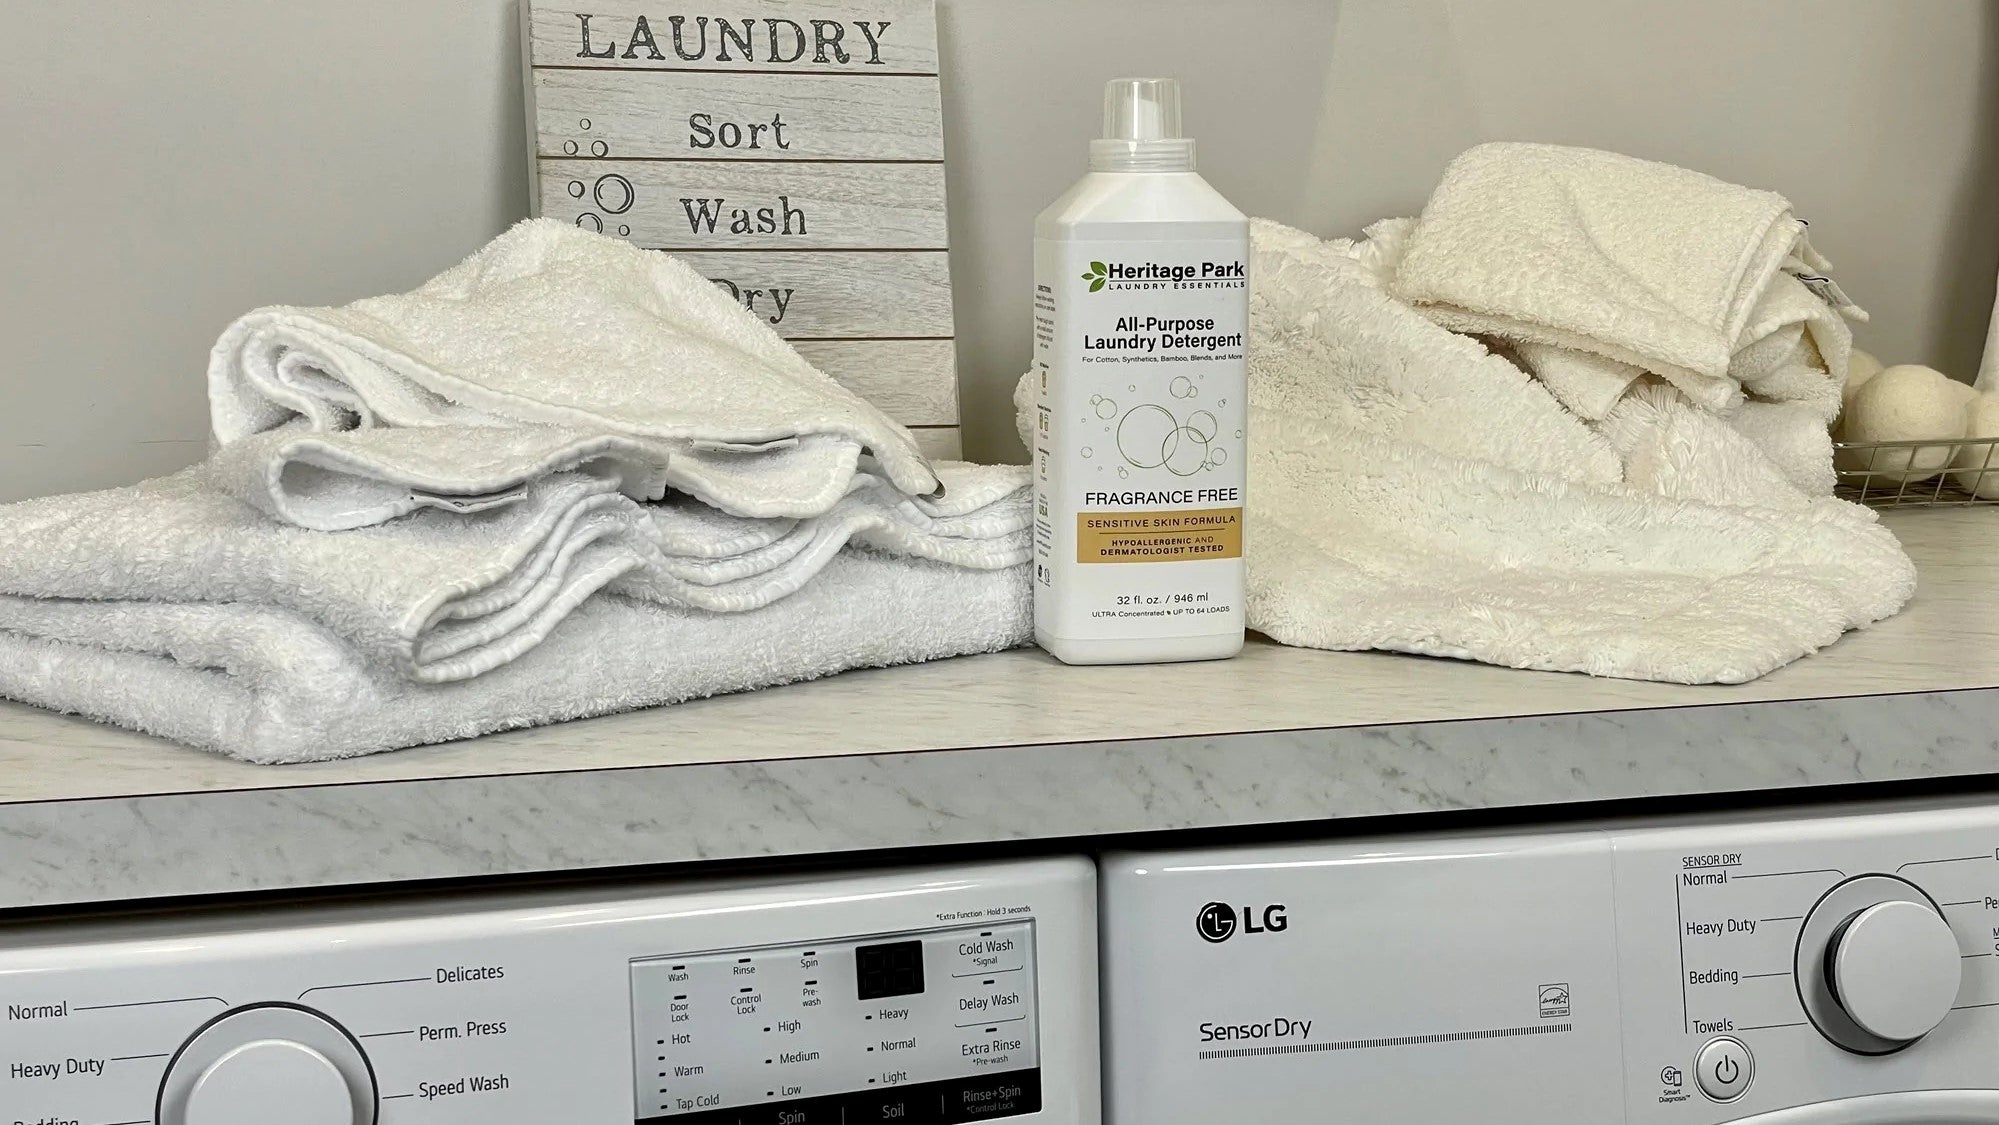 How to Wash and Care for Abyss Bath Towels & Habidecor Rugs Heritage Park Laundry Detergent on Washing Machine with Fine Linens and Towels